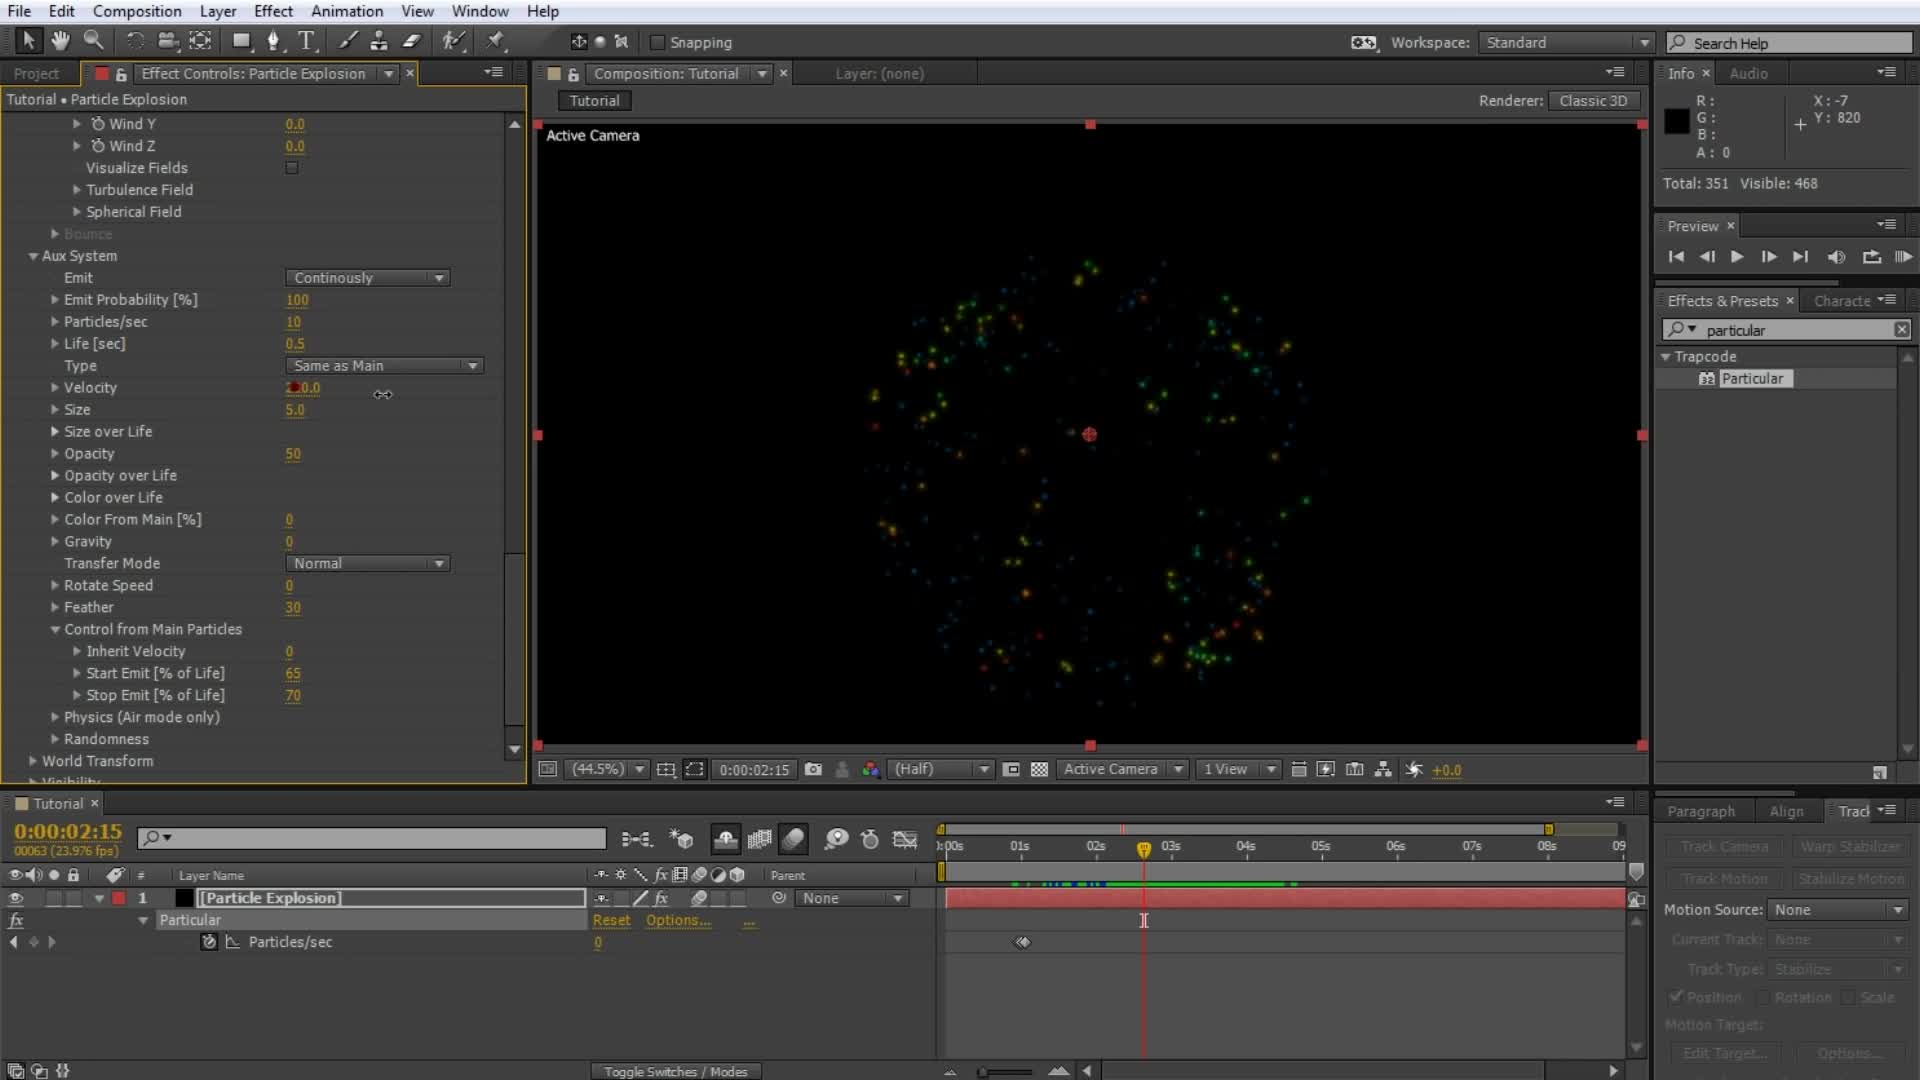 Creating Fireworks in Adobe After Effects with Trapcode Particular